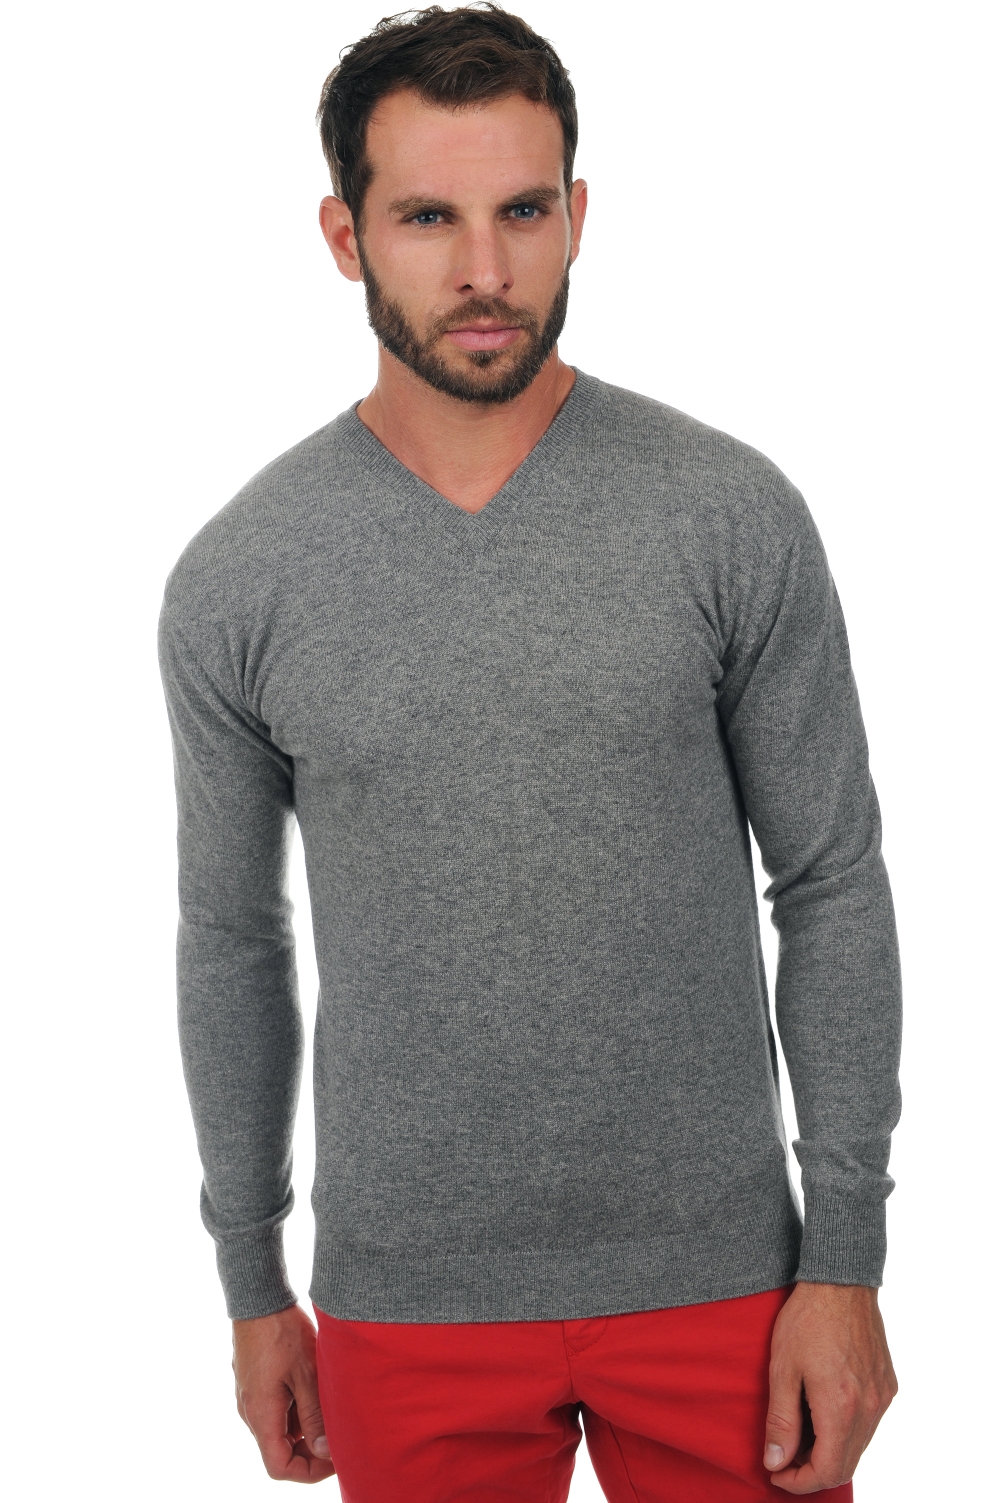 Cachemire pull homme col v maddox gris chine 3xl